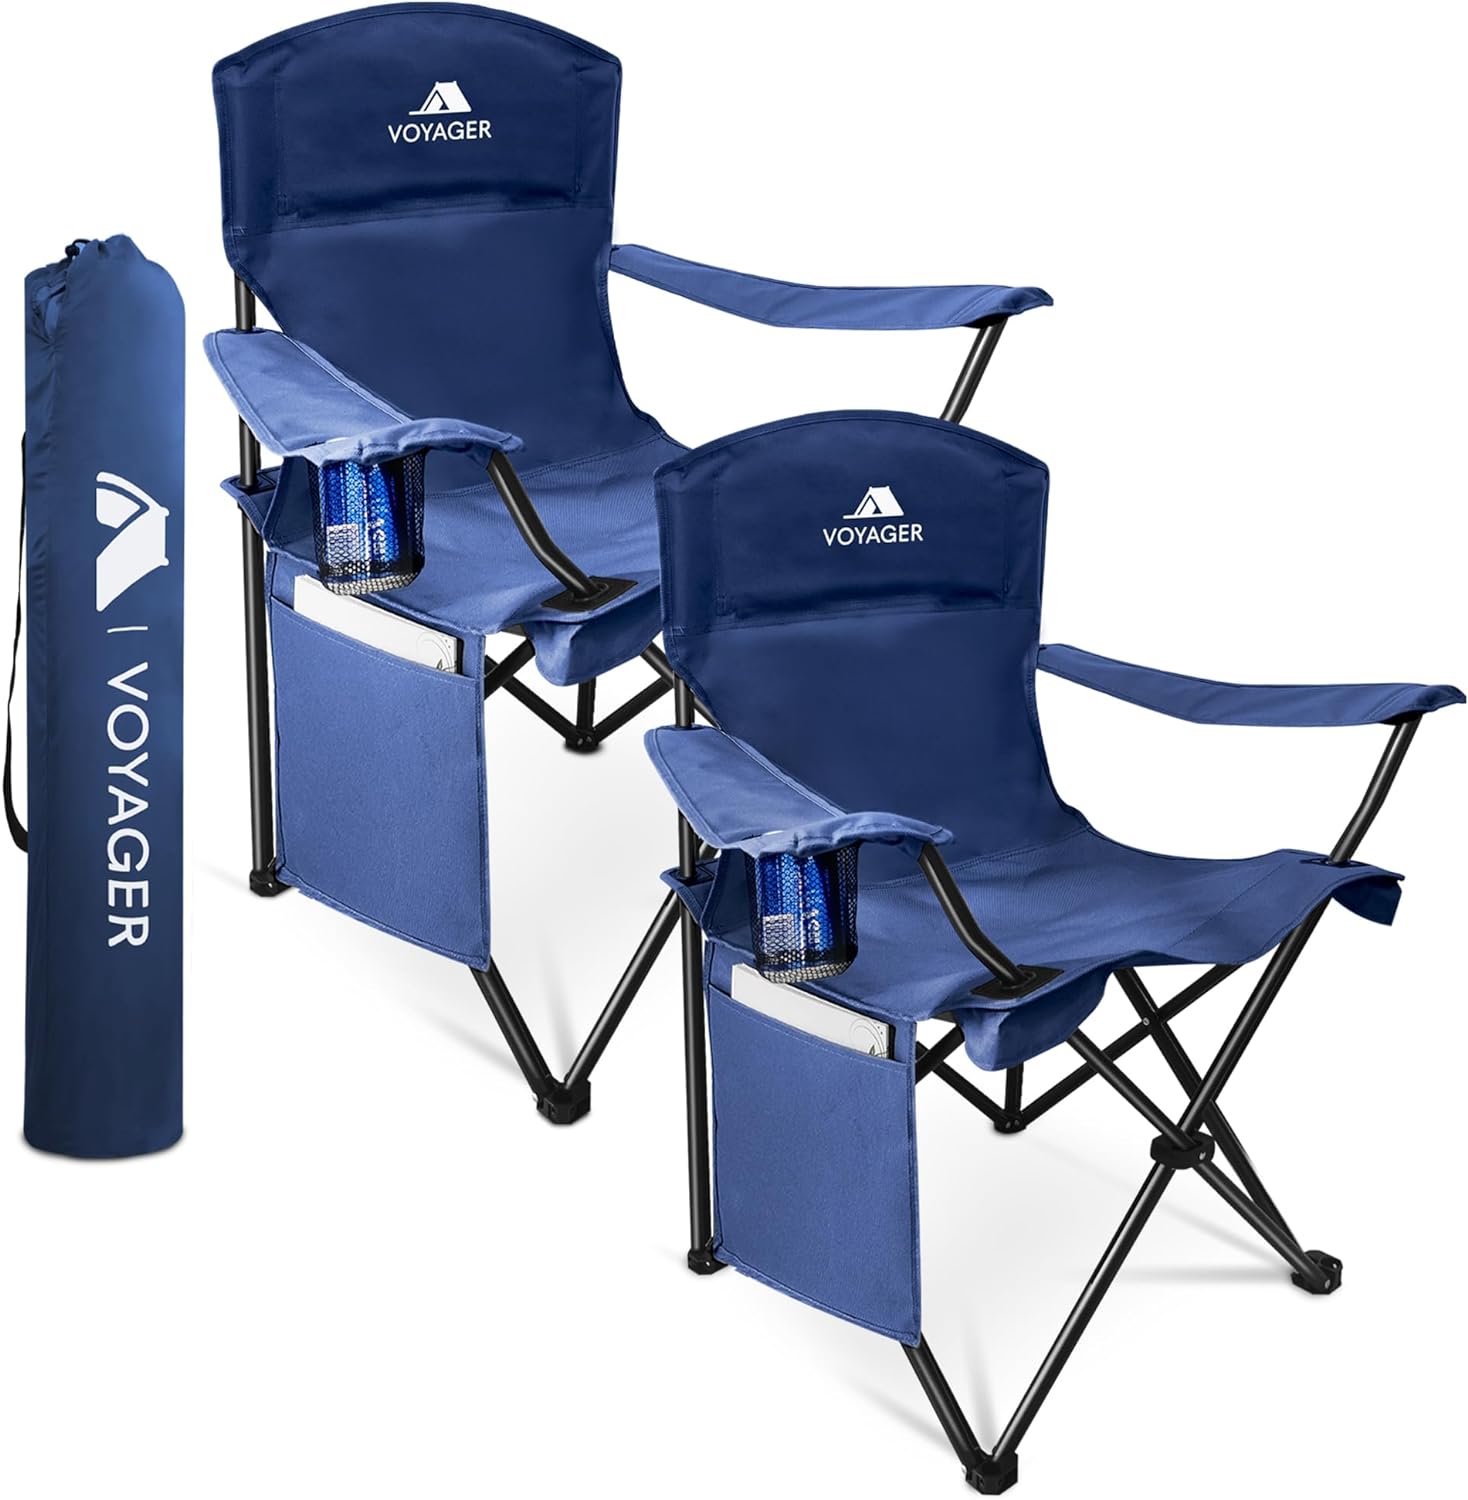 Voyager Folding Camping Chair 2-Pack, Lightweight with Pocket and Drinks Holder, Holds up to 120kg Each, Easy to Transport, Foldable Outdoor Chair Set